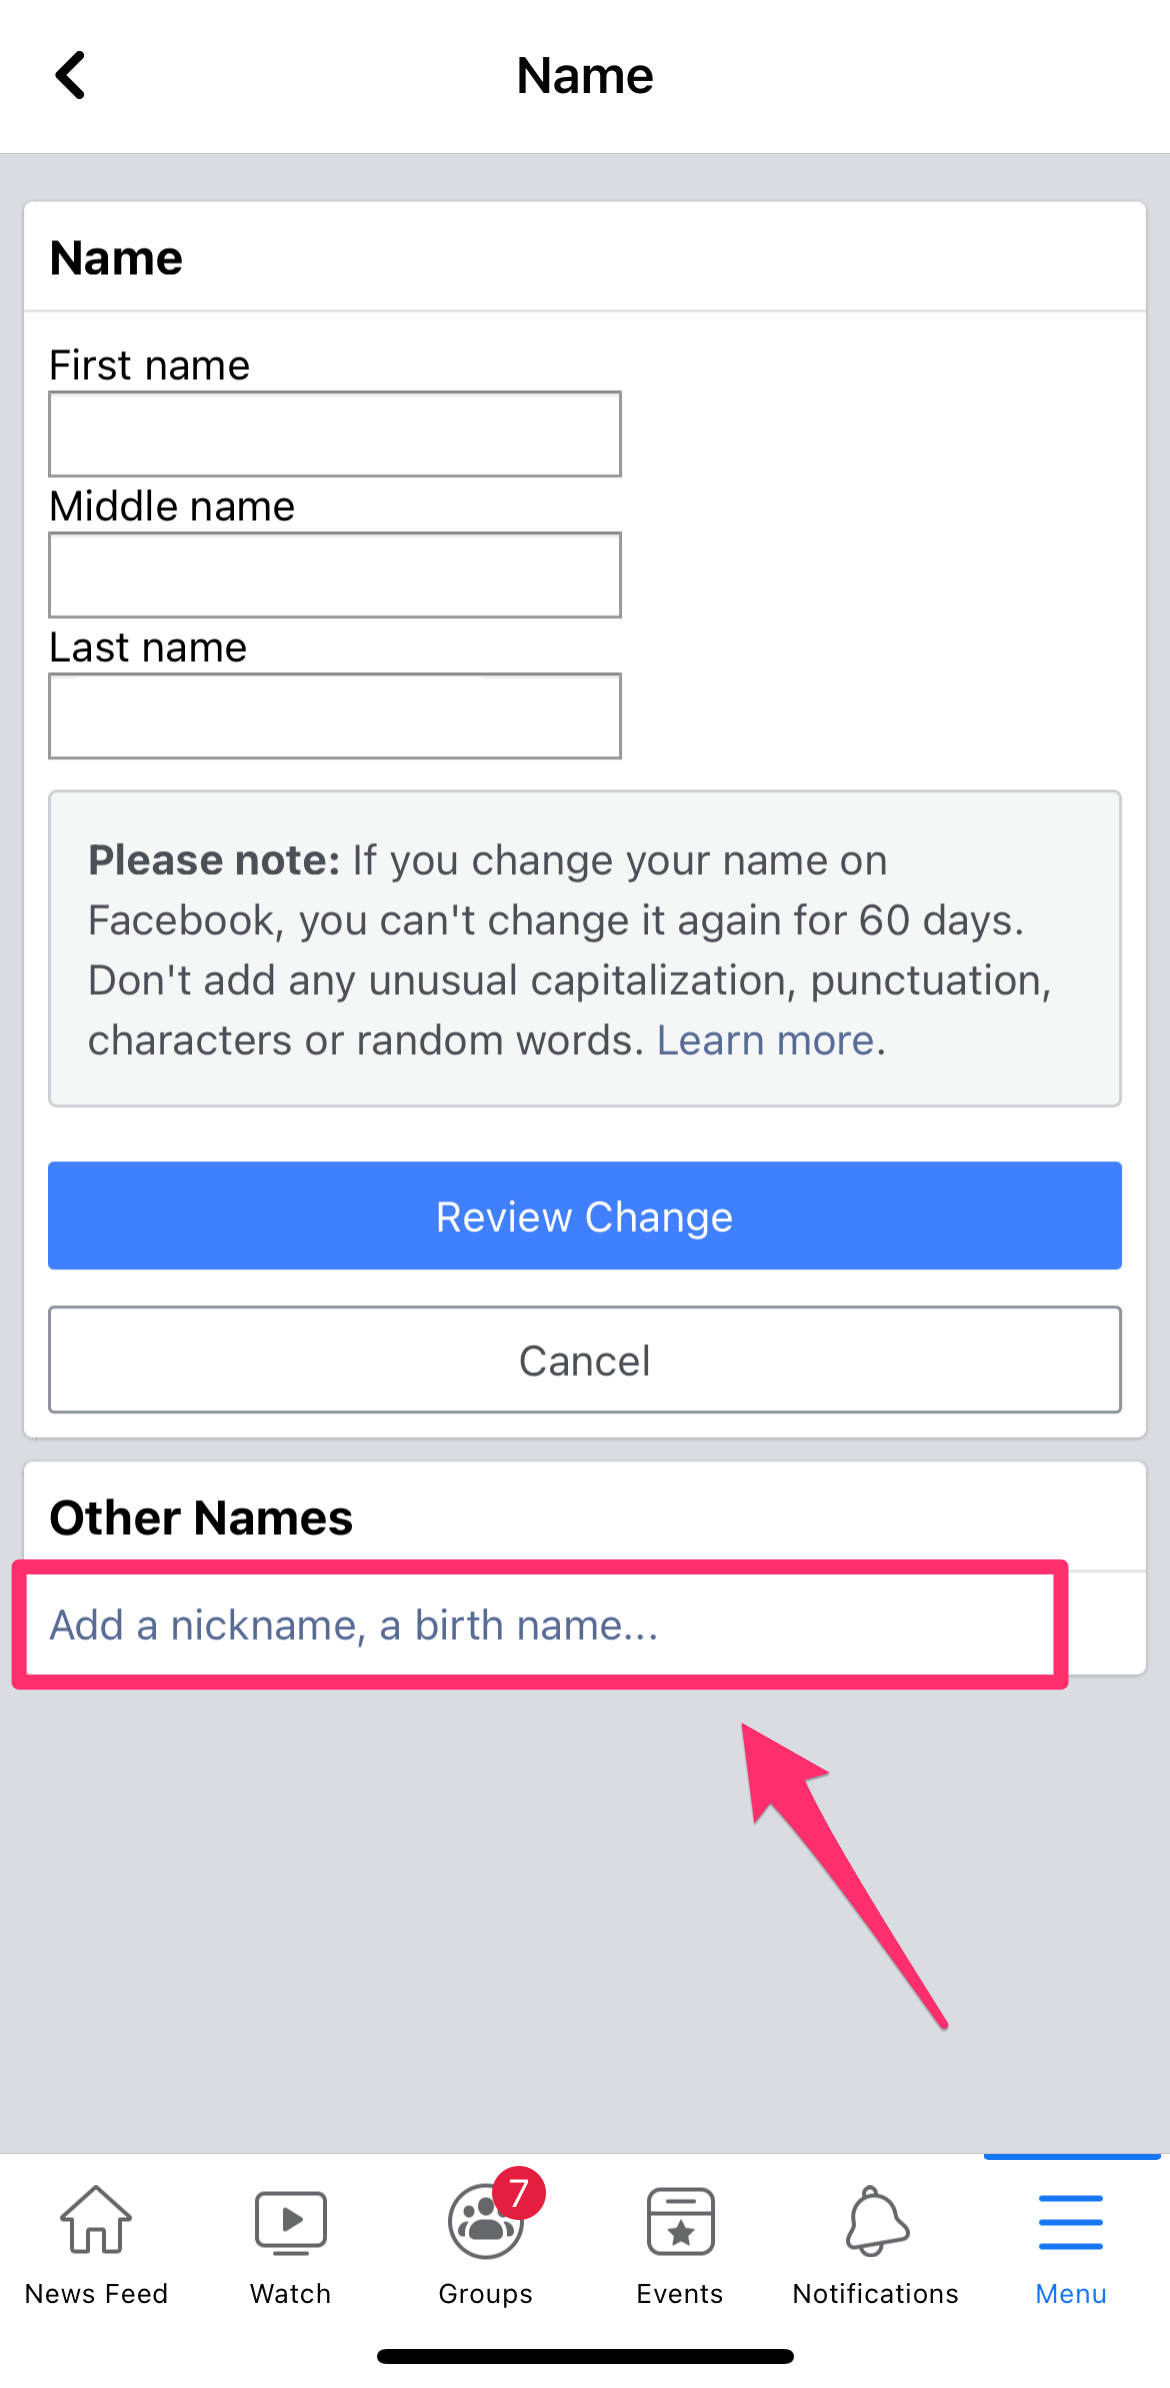 Screenshot of Facebook app Name Change page with Nickname option highlighted